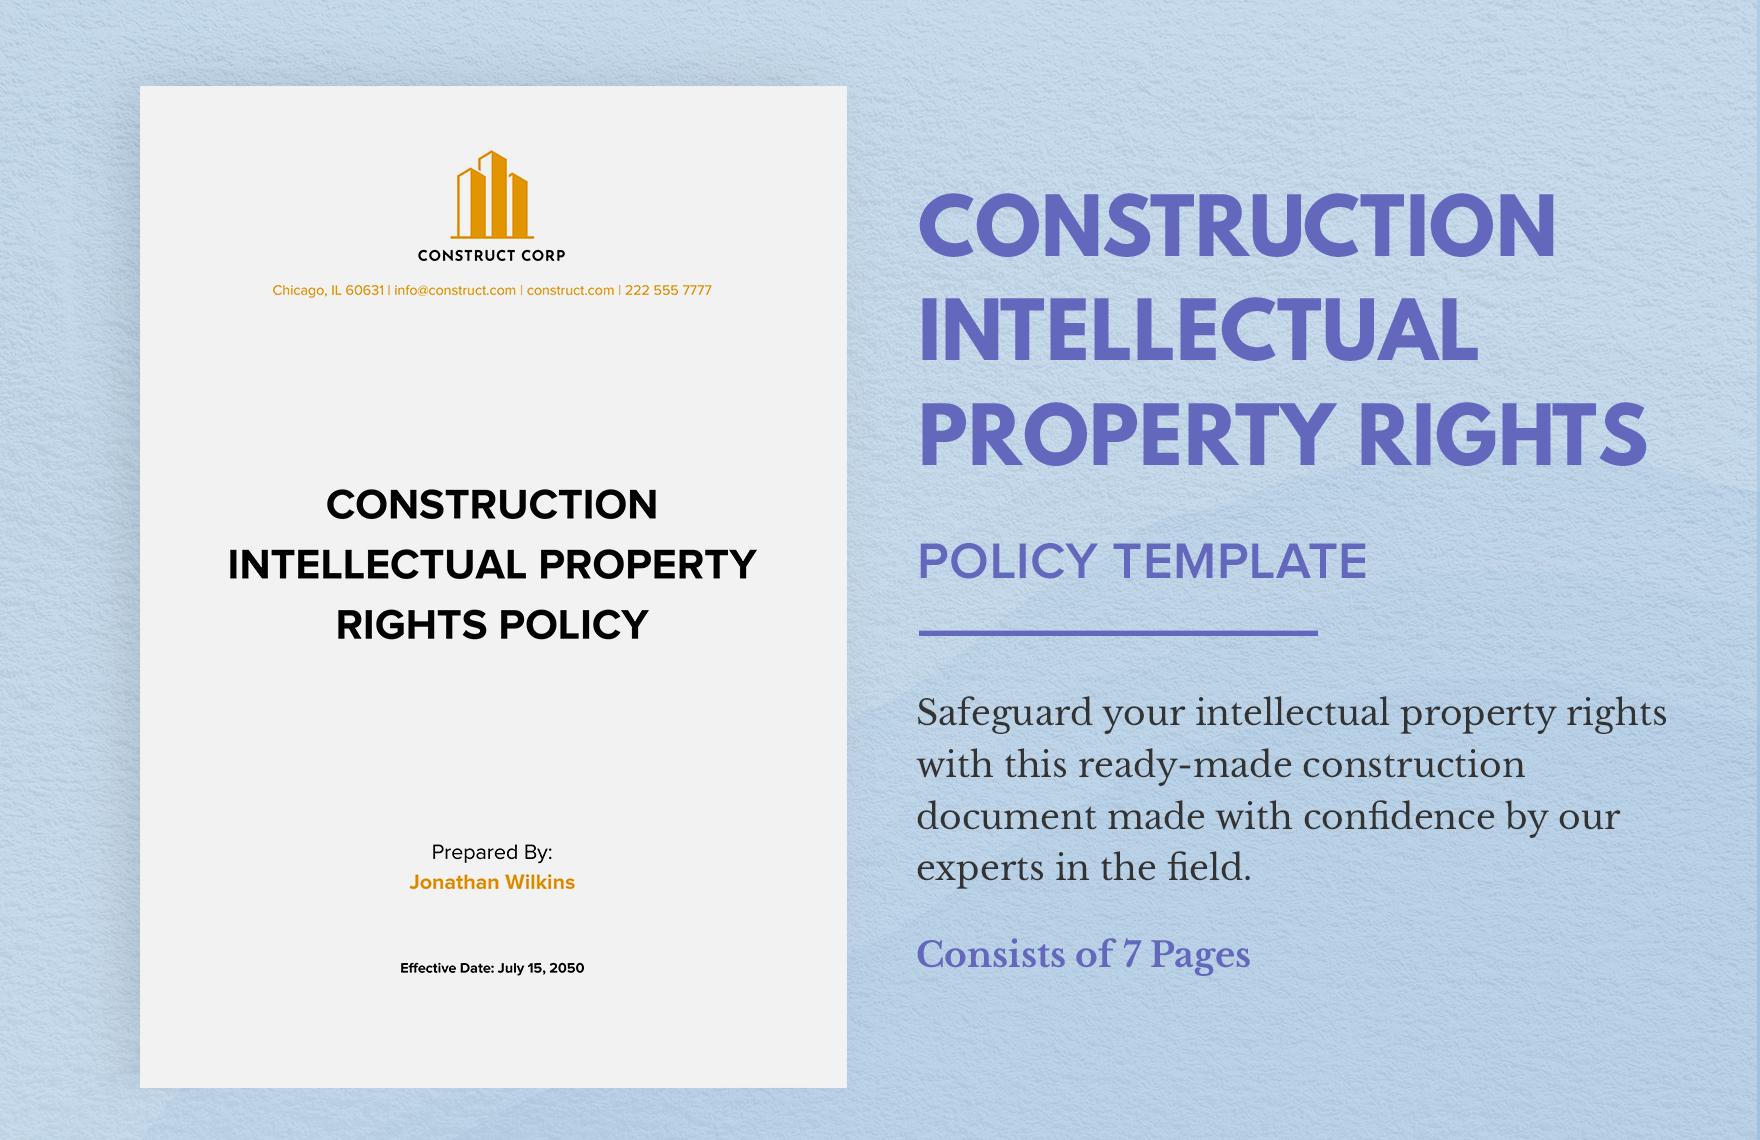 Construction Intellectual Property Rights Policy Template